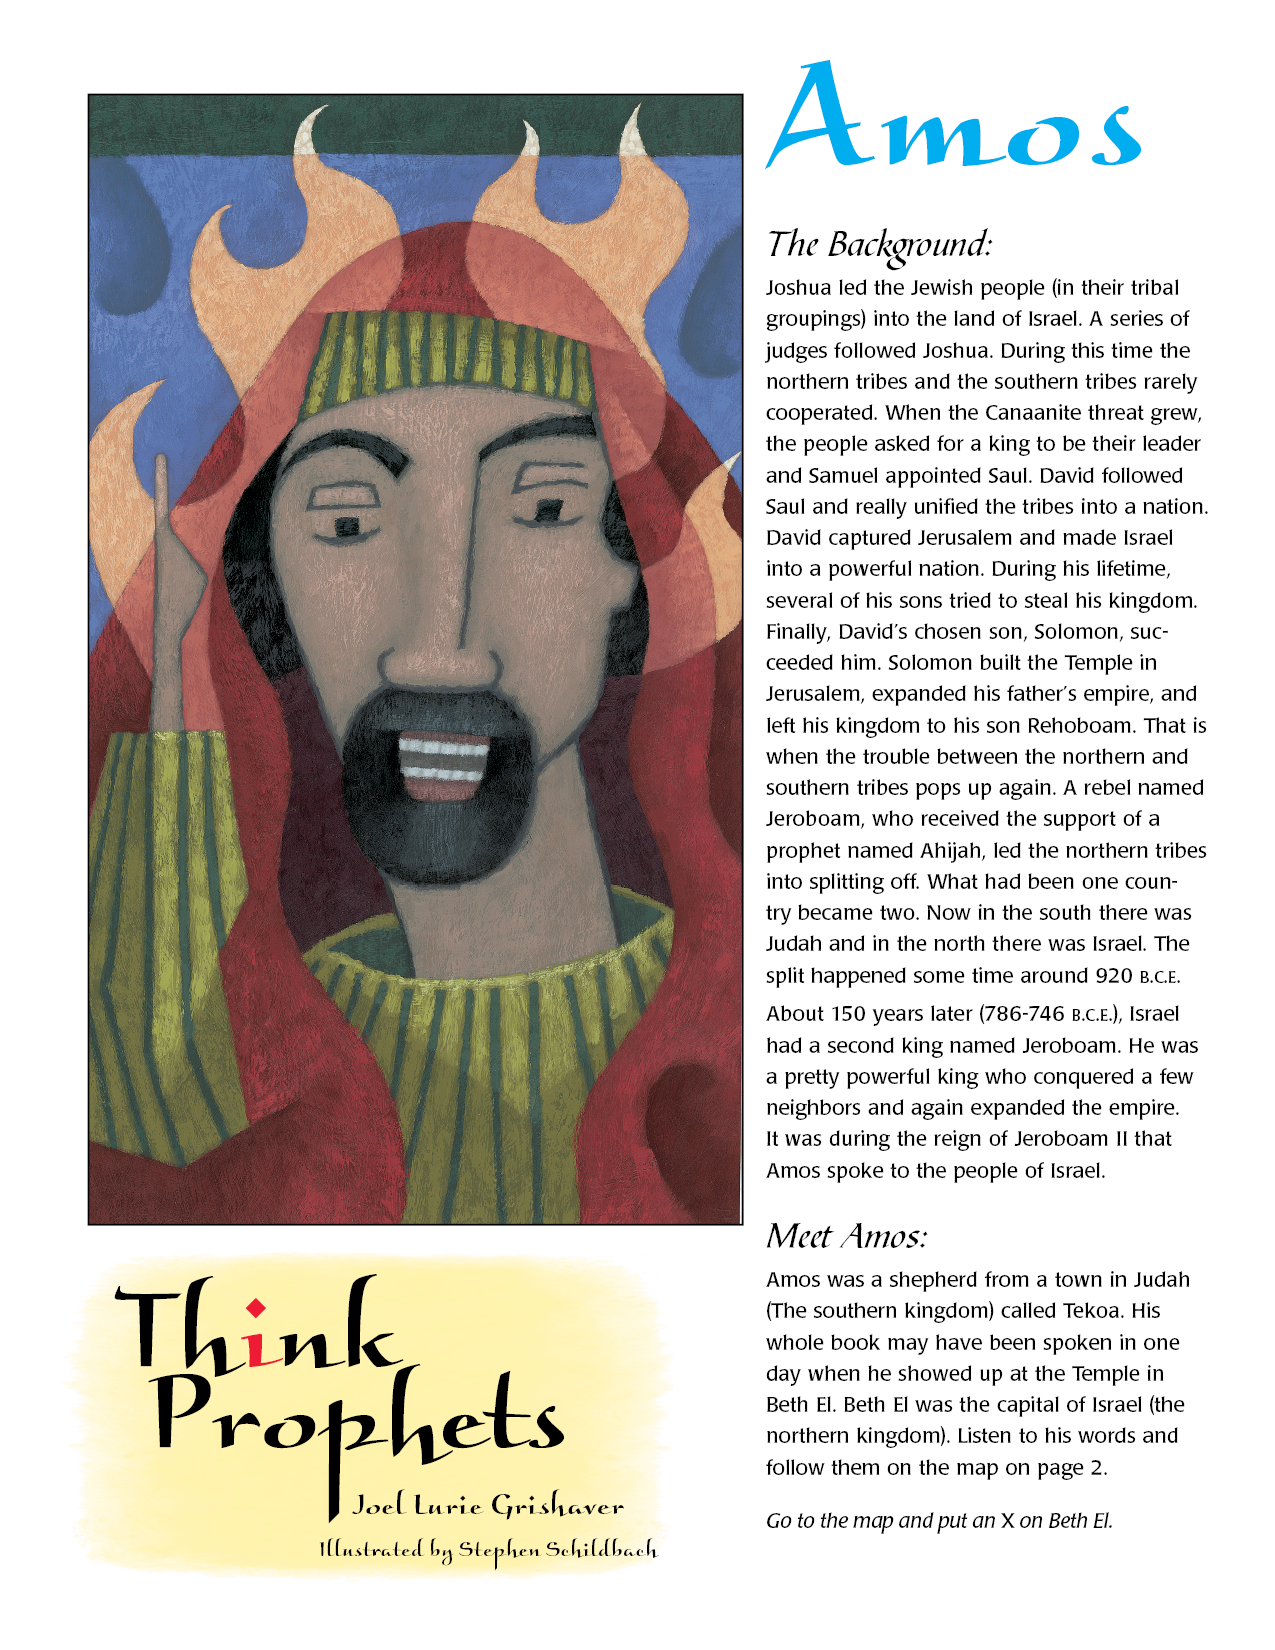 Think Prophets: Amos